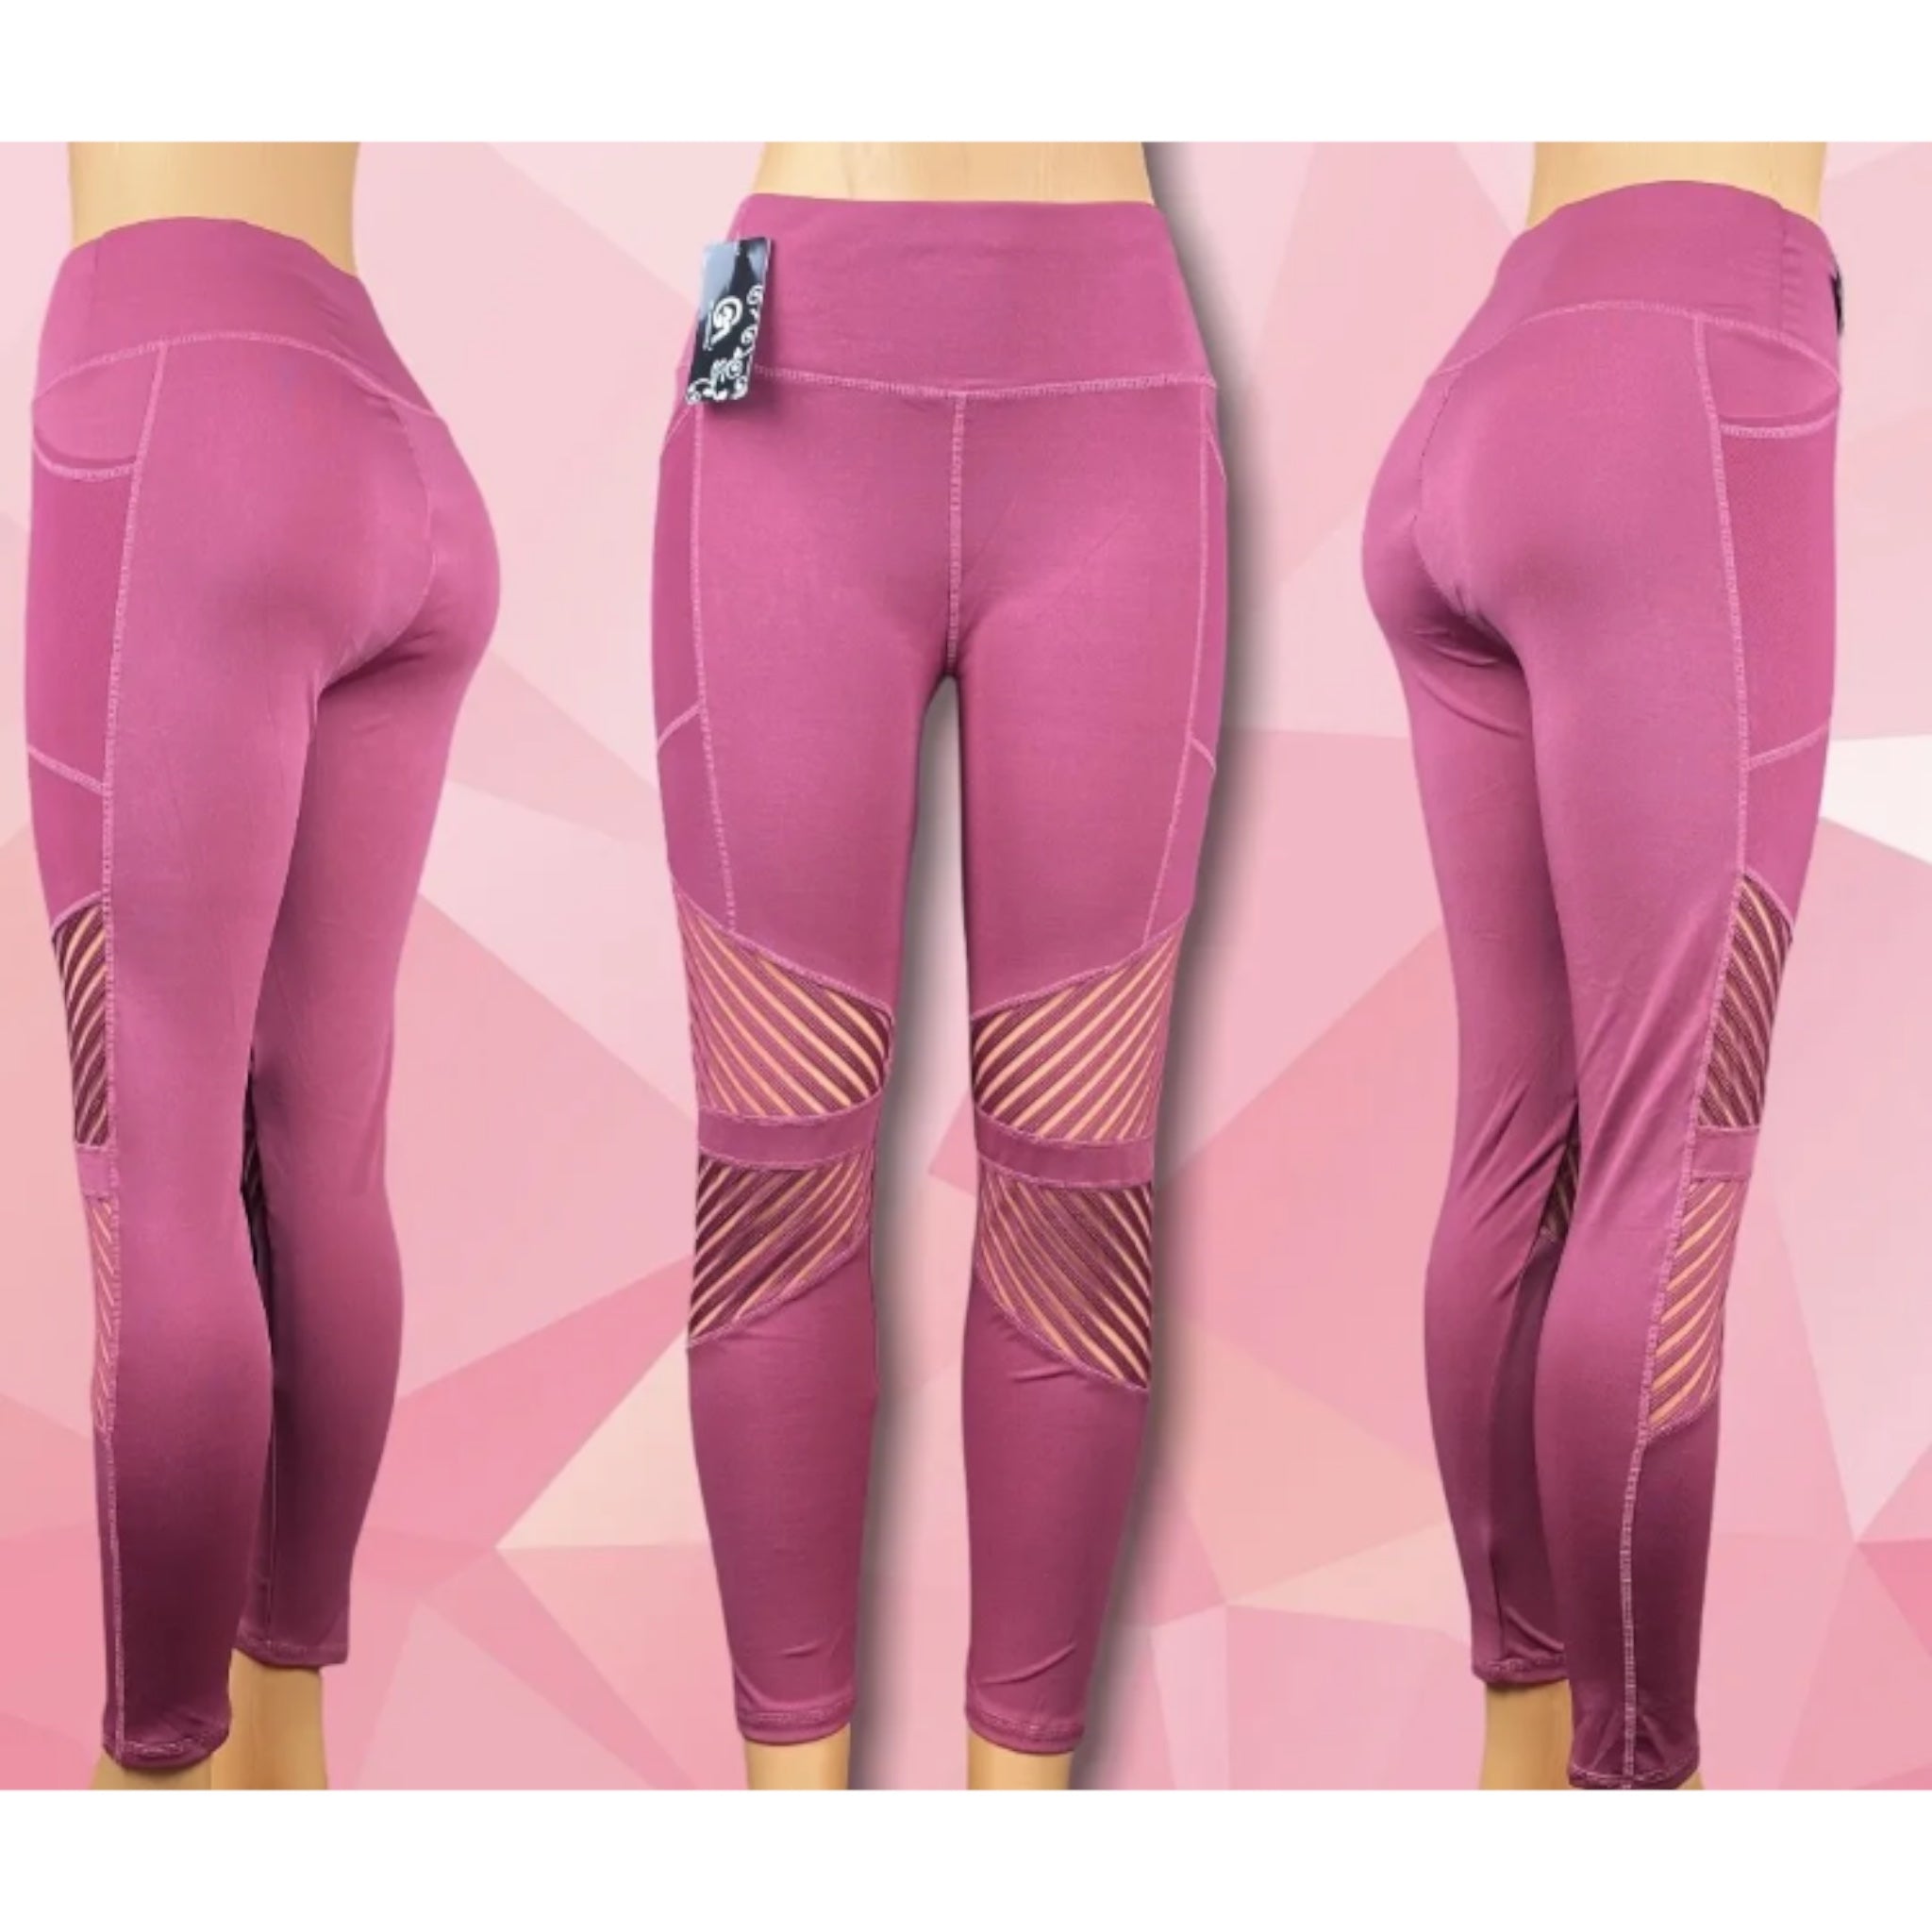 Women's High-Rise Leggings with Mesh Cutouts & Side pockets